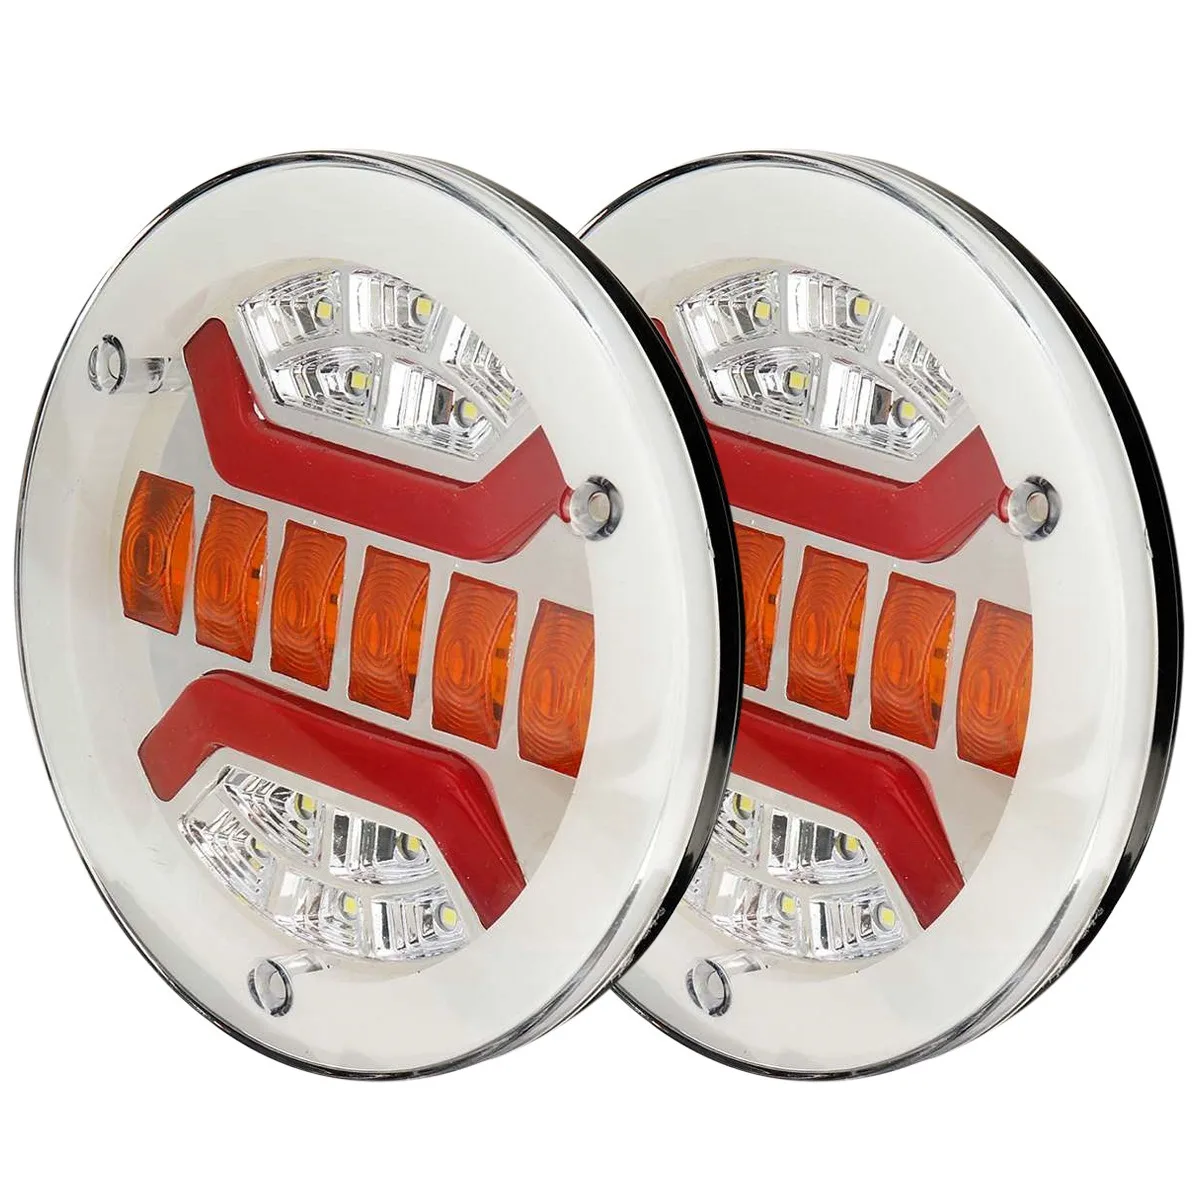 

2Pcs 43 LED Truck Rear Tail Light Taillights for Trailer Lorry Caravan Camper Brake Stop Lamp DRL Turn Signal Indicator